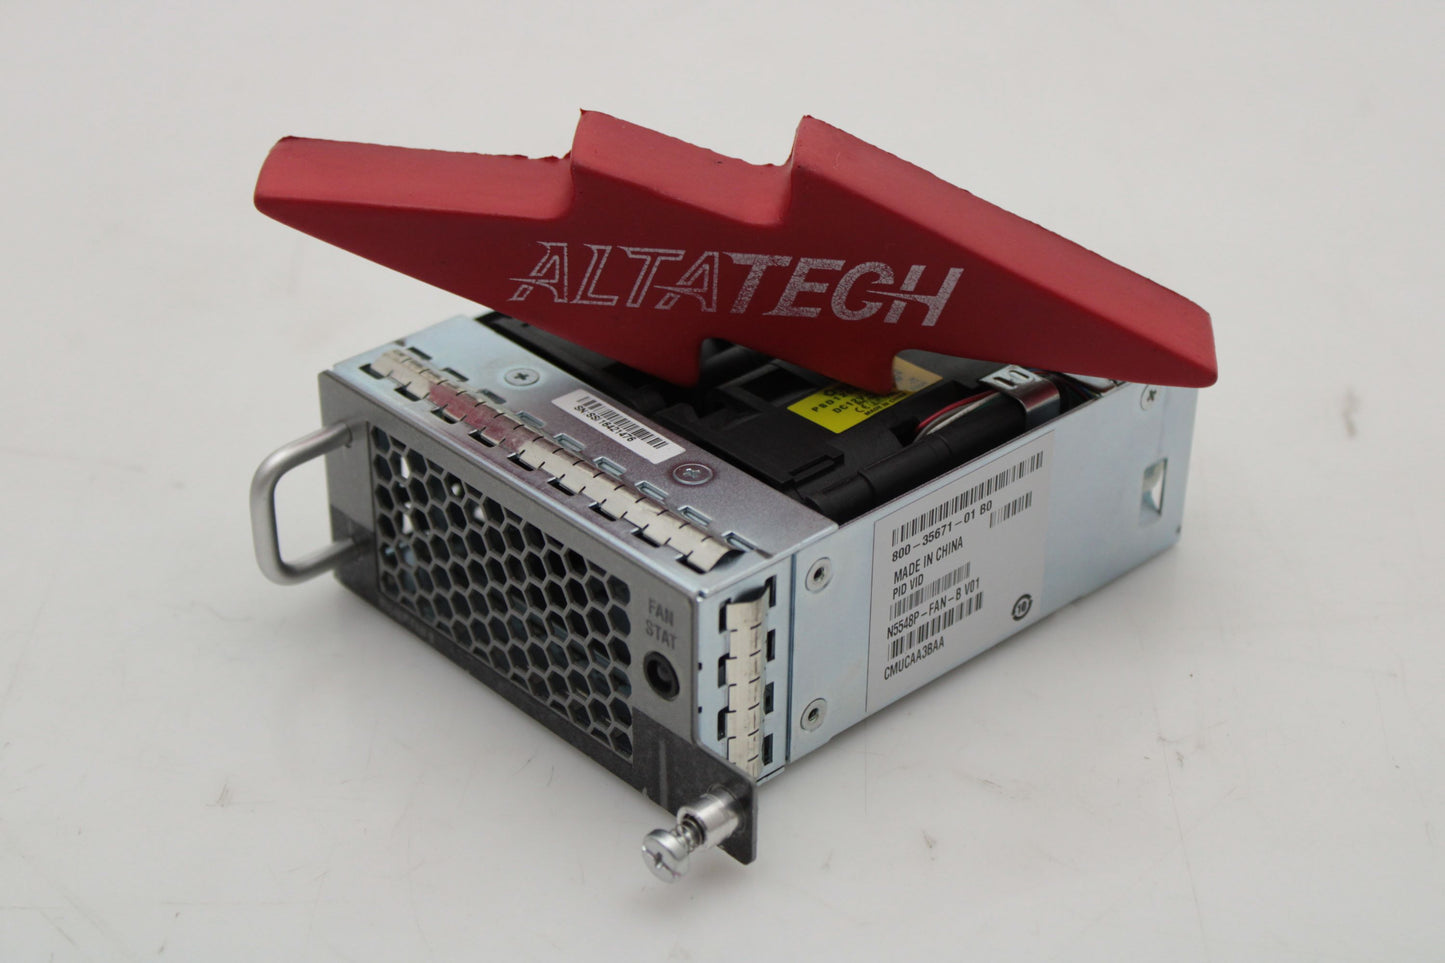 Cisco N5548P-FAN-B CISCO N5548P-FAN-B Nexus 5548UP Fan Module with Back to Front Airflow, Used